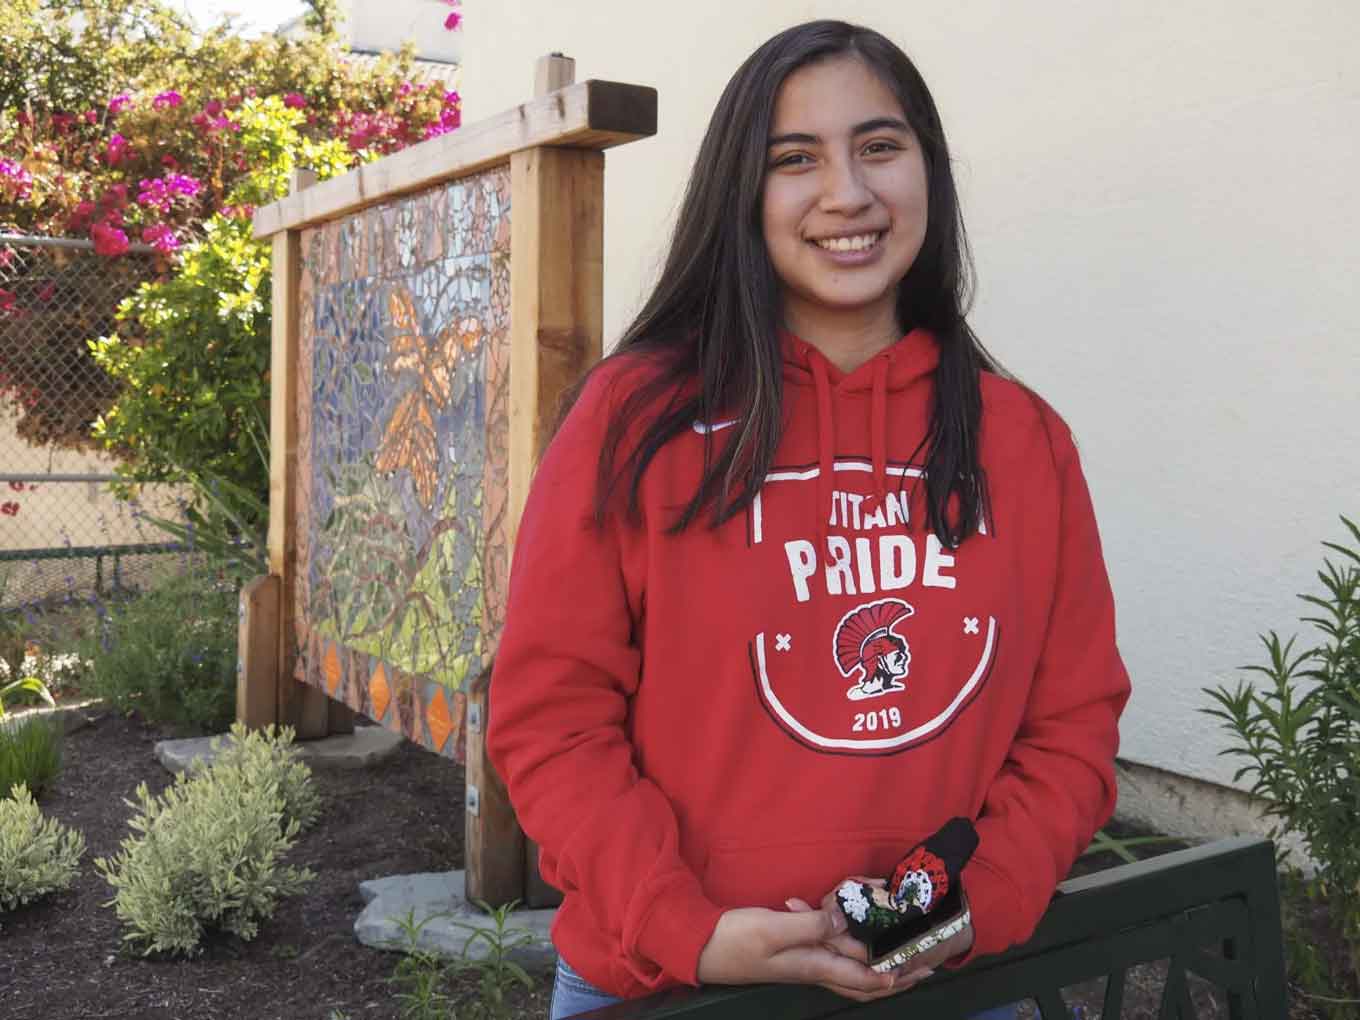 A freshman at UC Berkley wears a red "Tital Pride" sweatshirt and smiles for the camera